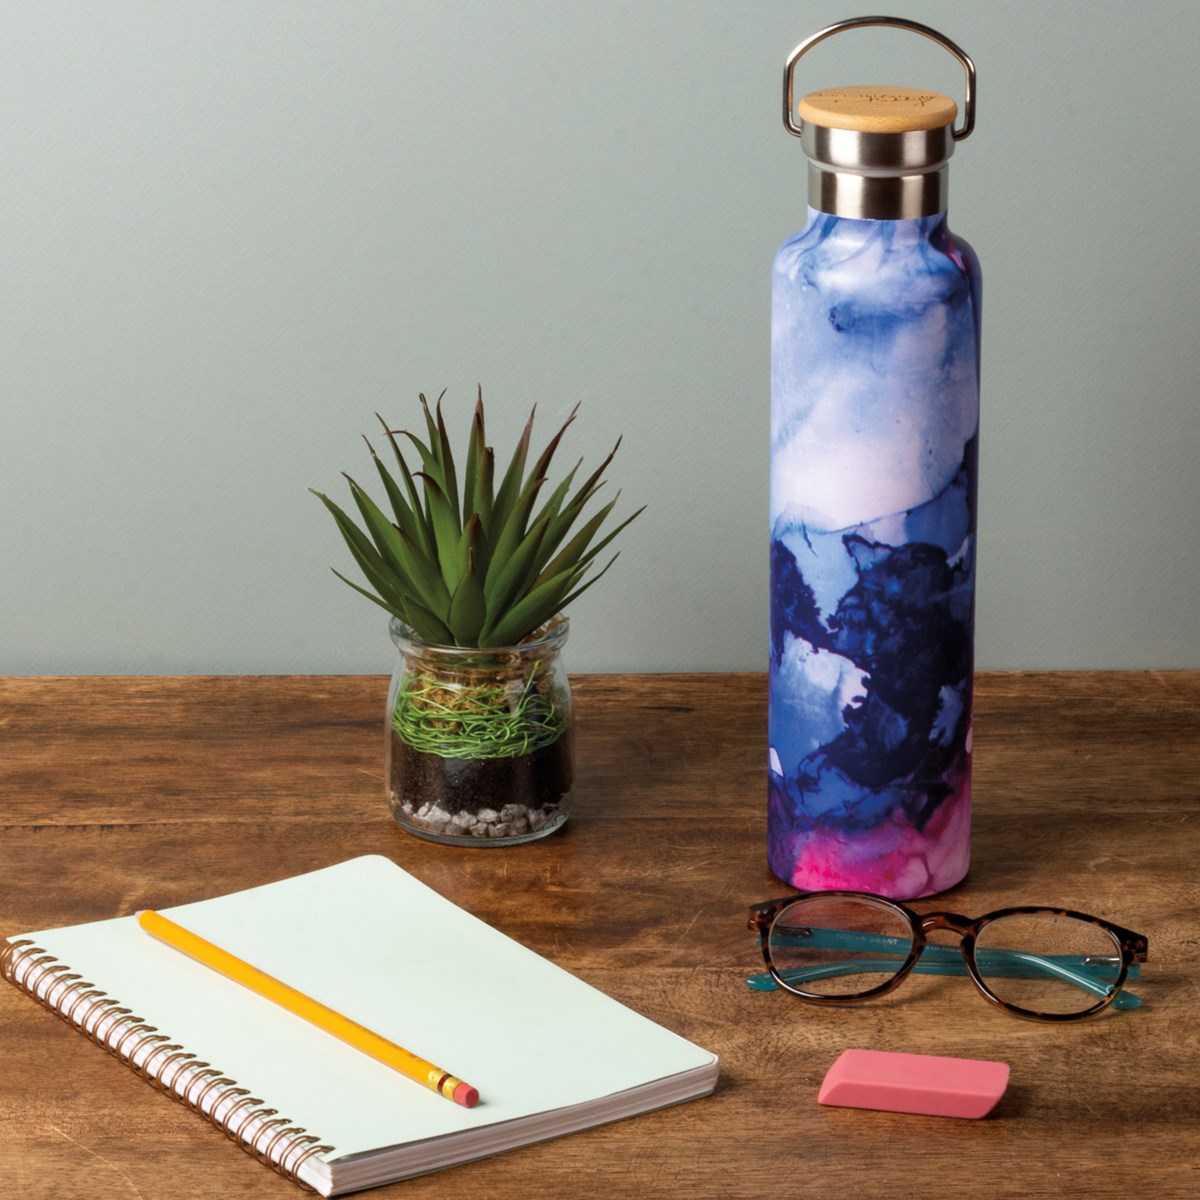 Dreaming Insulated Bottle - Stainless Steel, Bamboo